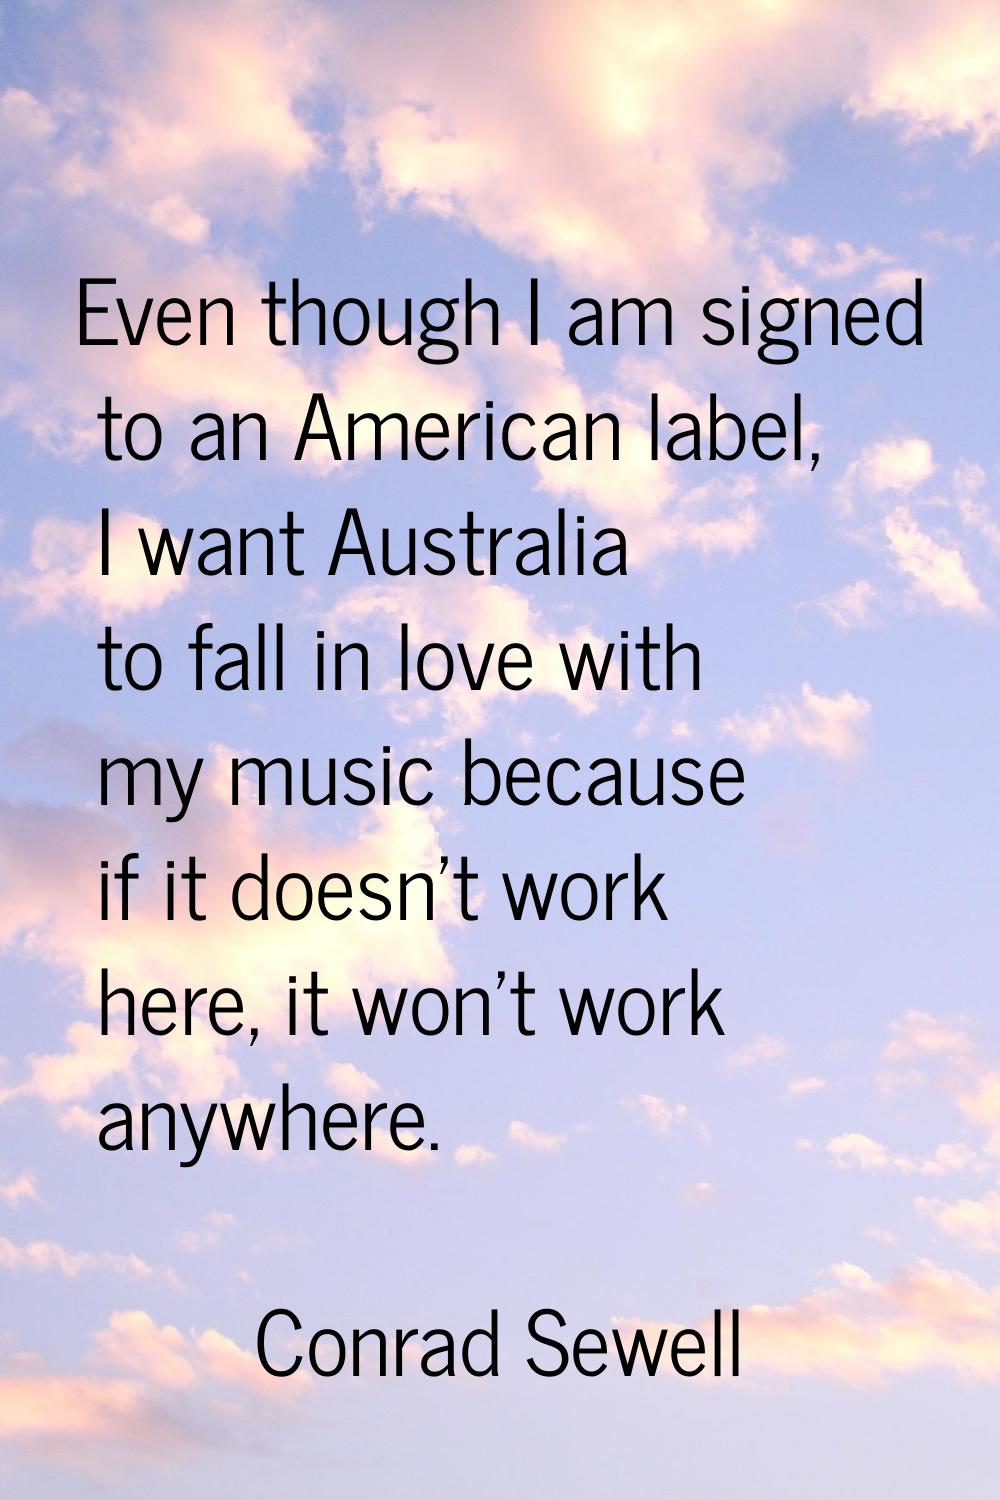 Even though I am signed to an American label, I want Australia to fall in love with my music becaus